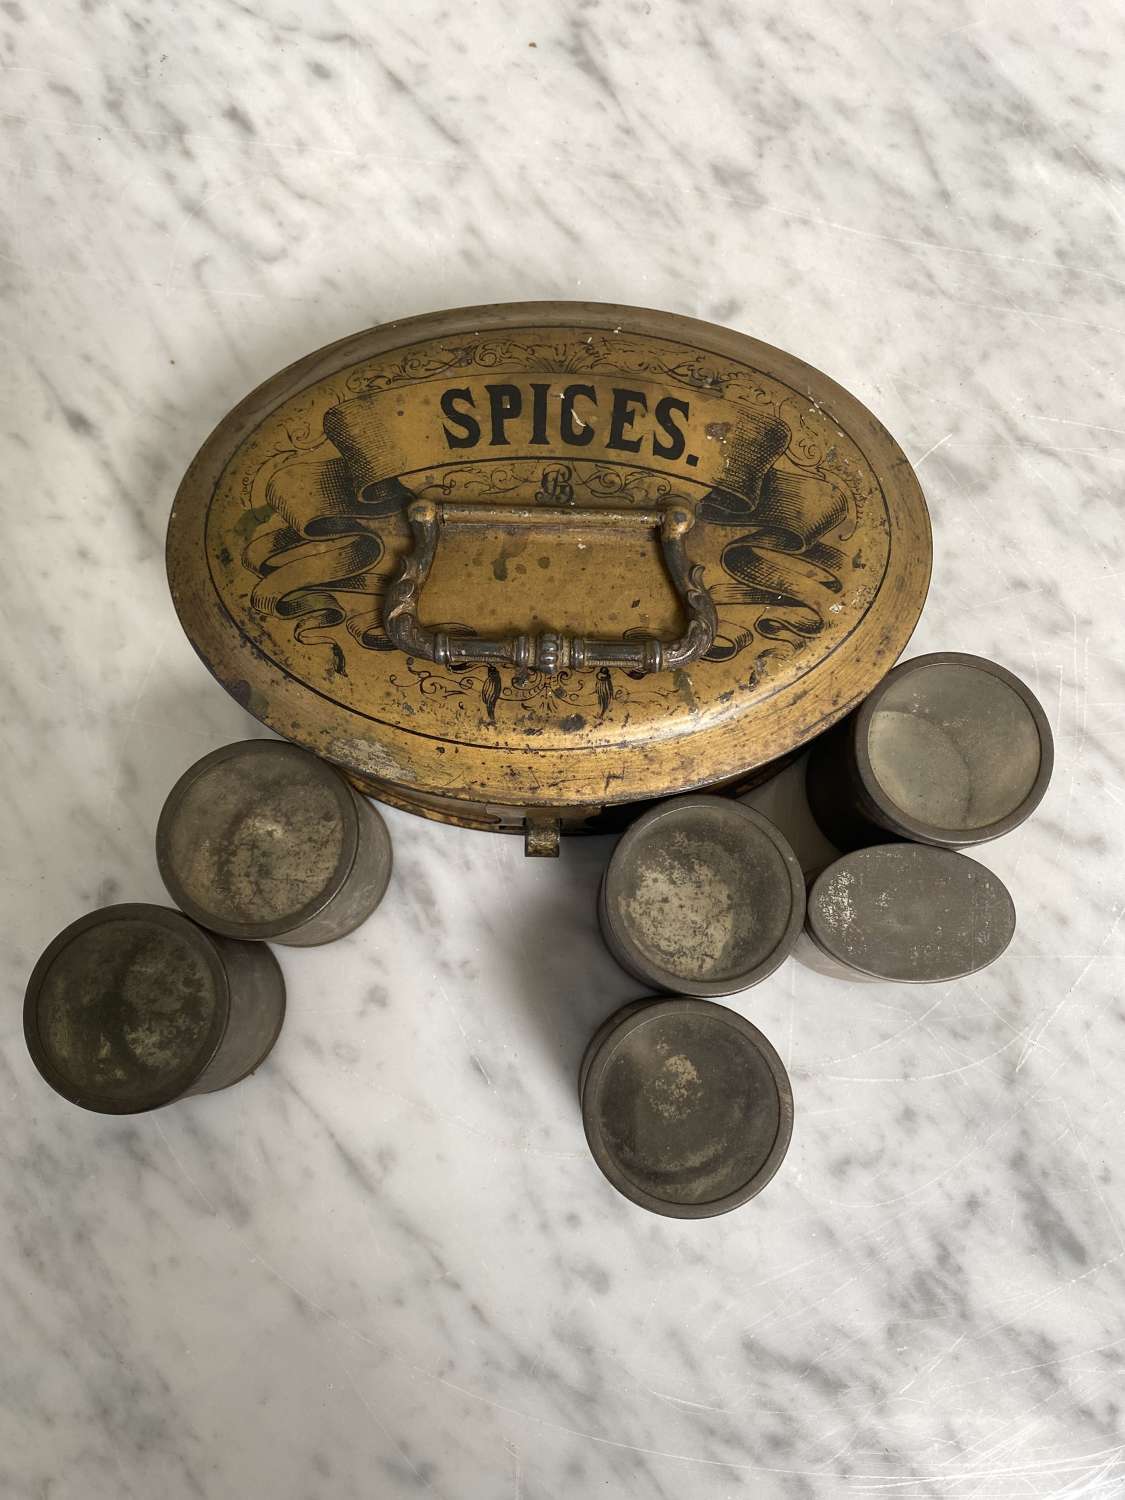 Late Victorian Spices Tin with Full Set of Spice Jars